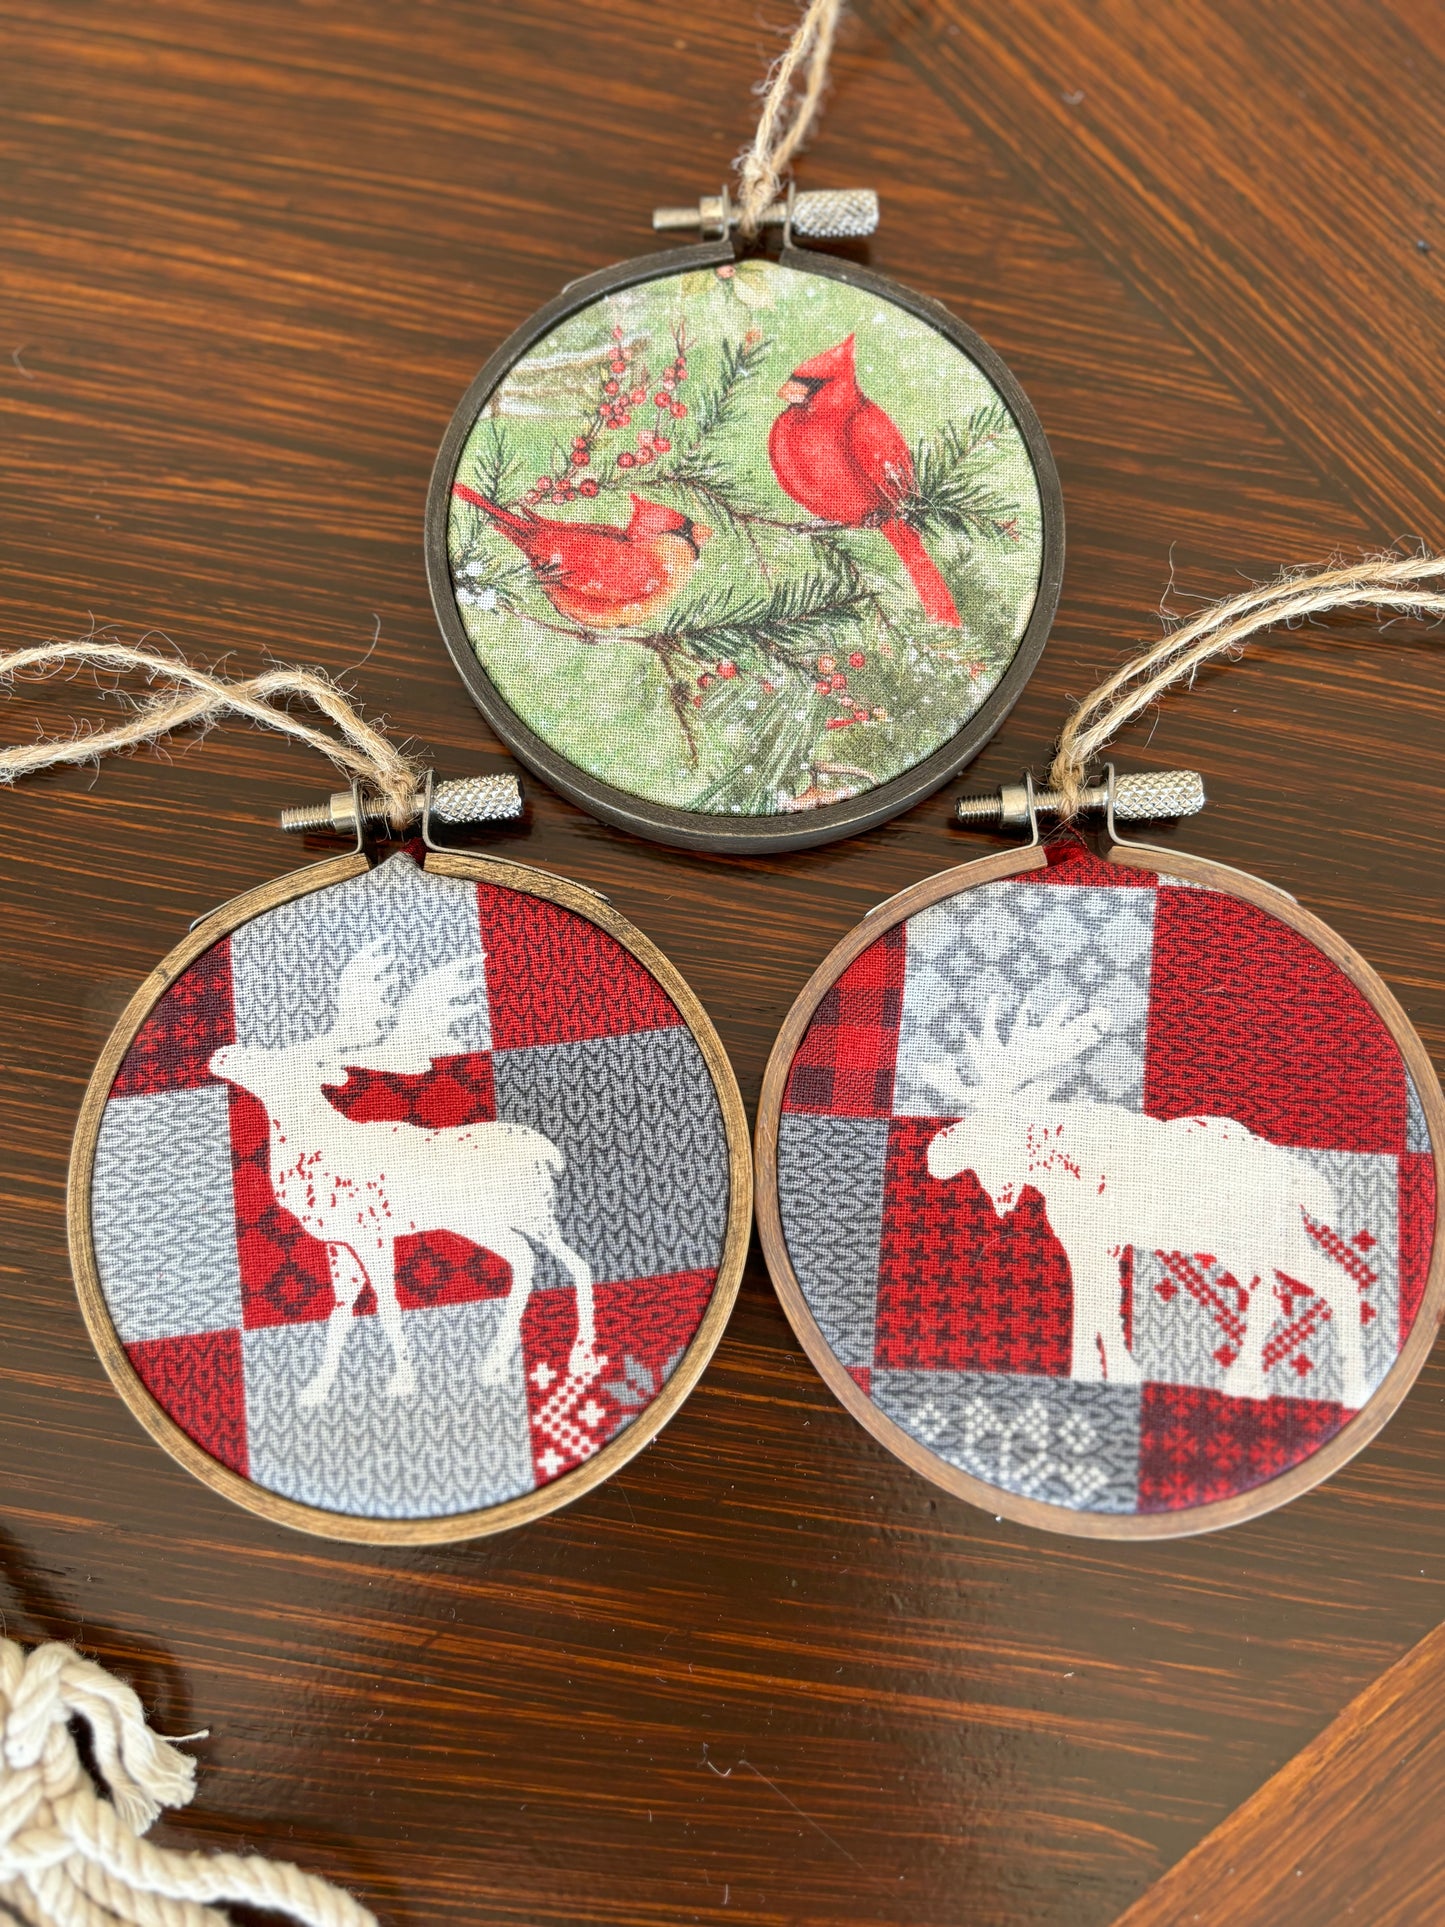 Set of 3 Rustic Fabric and Wood Handmade Christmas Ornaments, Vintage, Retro, Holiday, Cabin decor